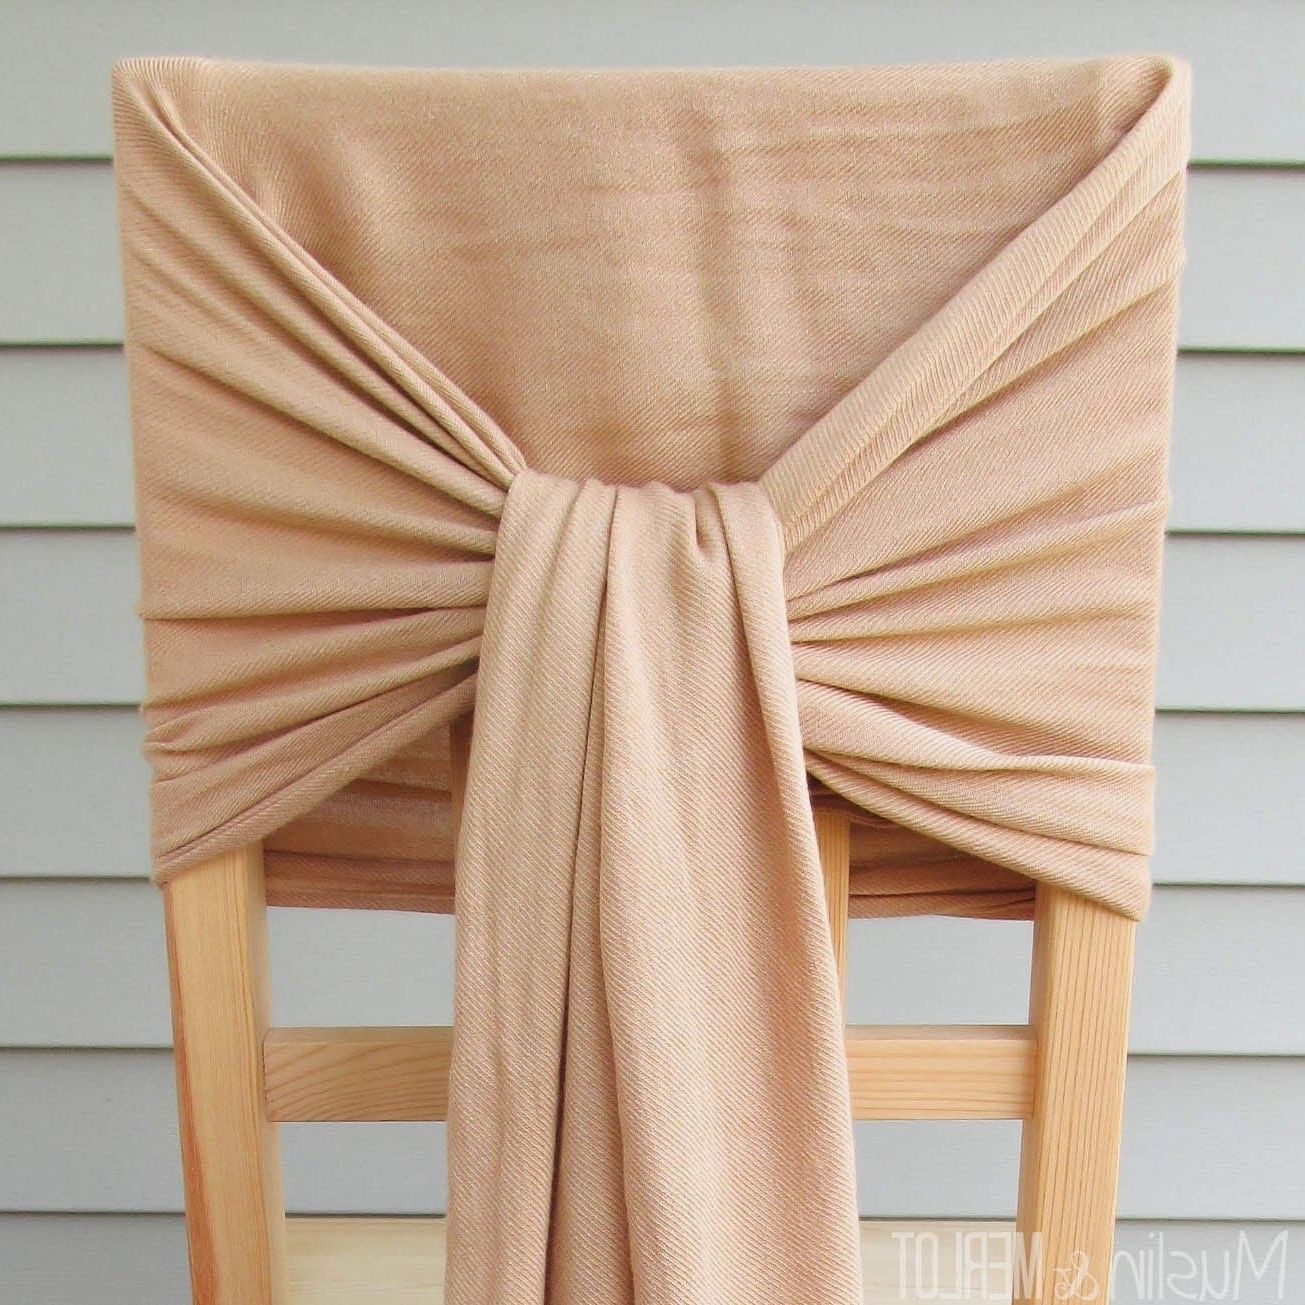 How To Decorate Chairs With Scarves! In  (View 5 of 20)